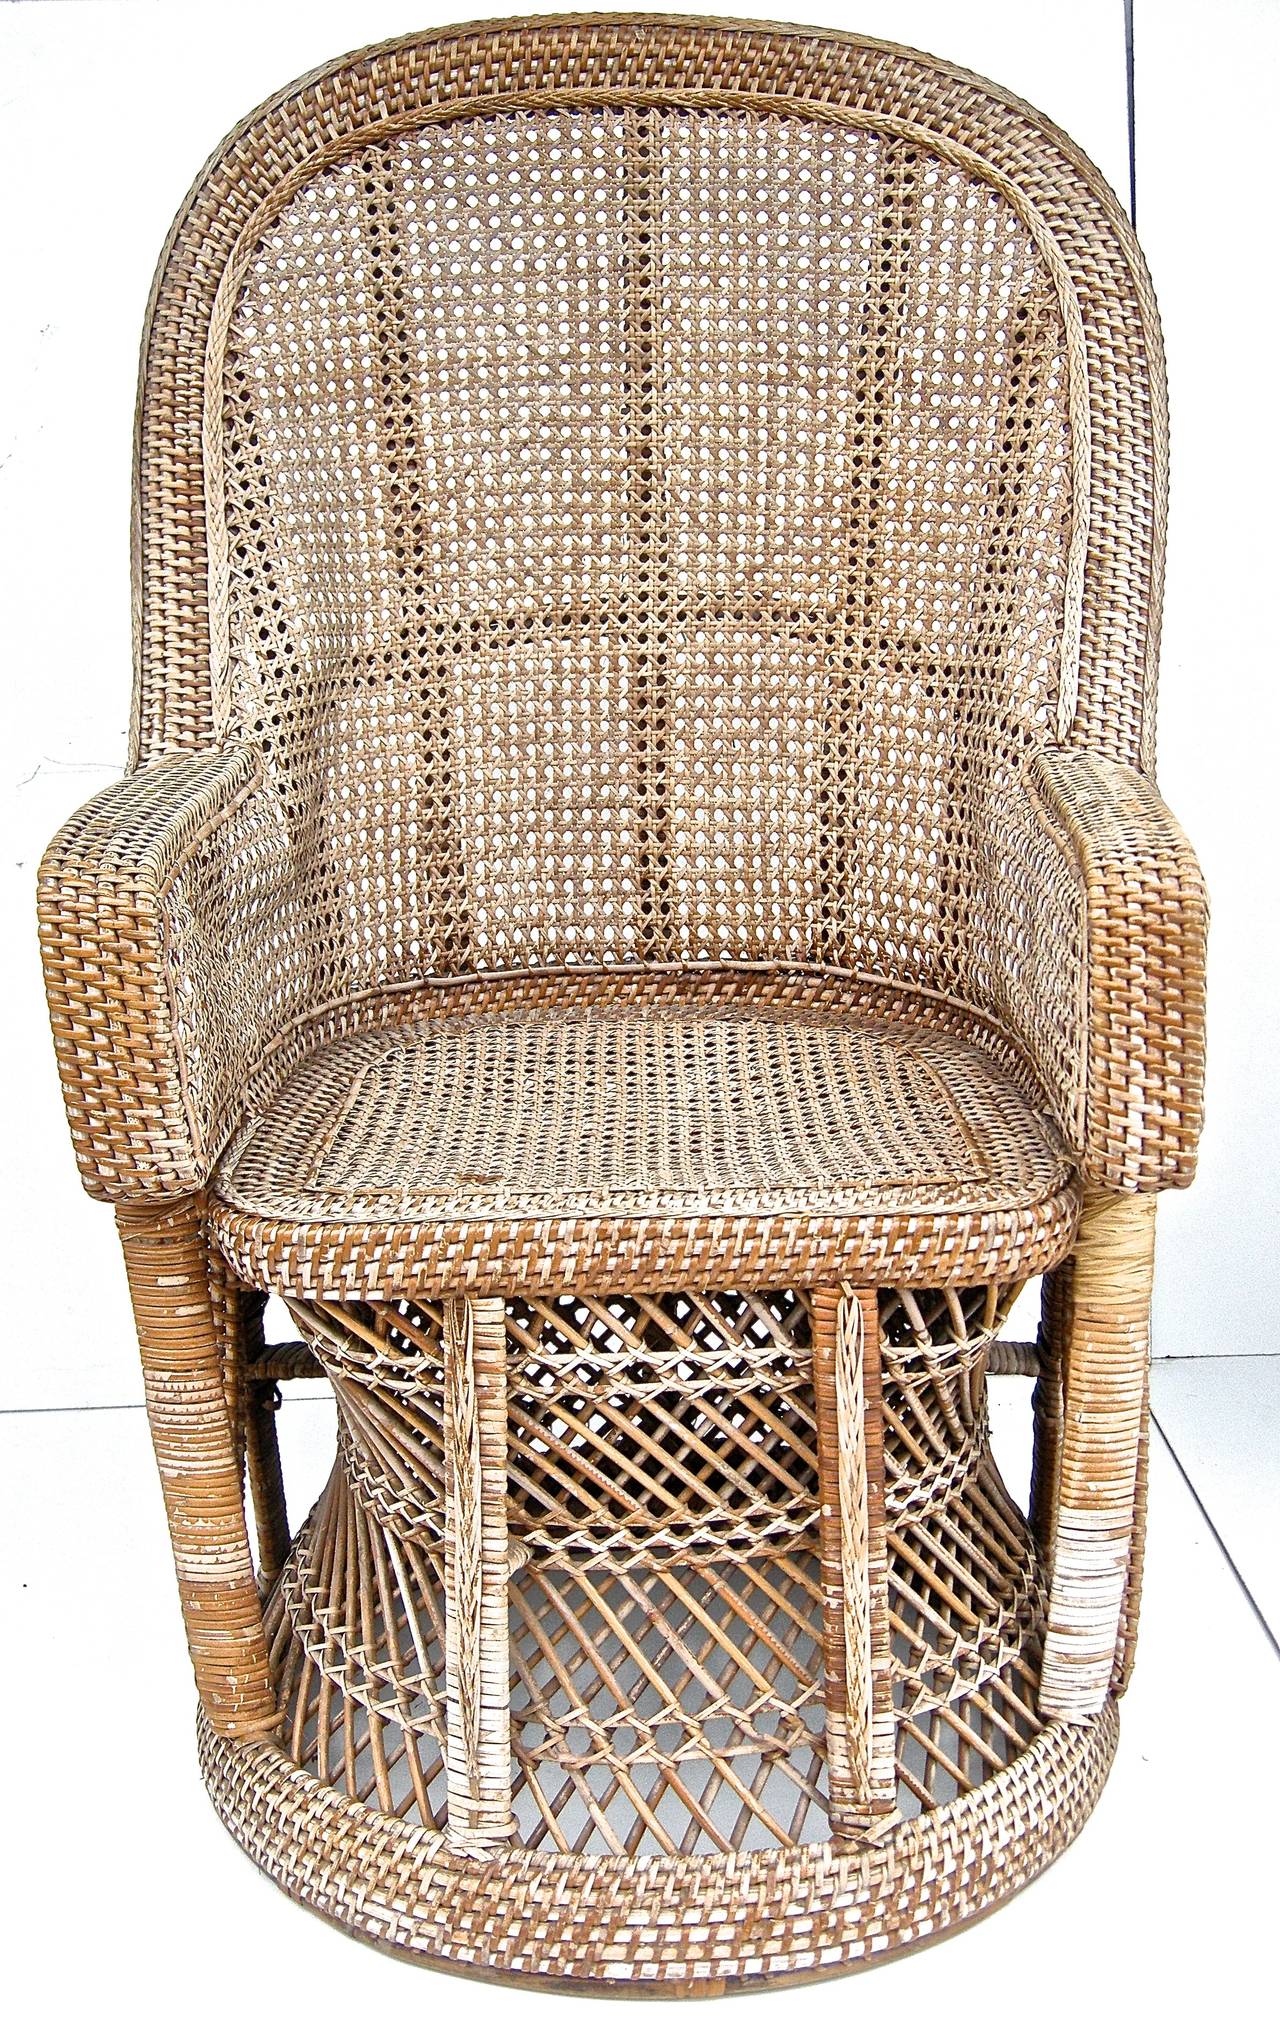 Woven Moroccan Inspired Diminutive Wicker Armchairs For Sale